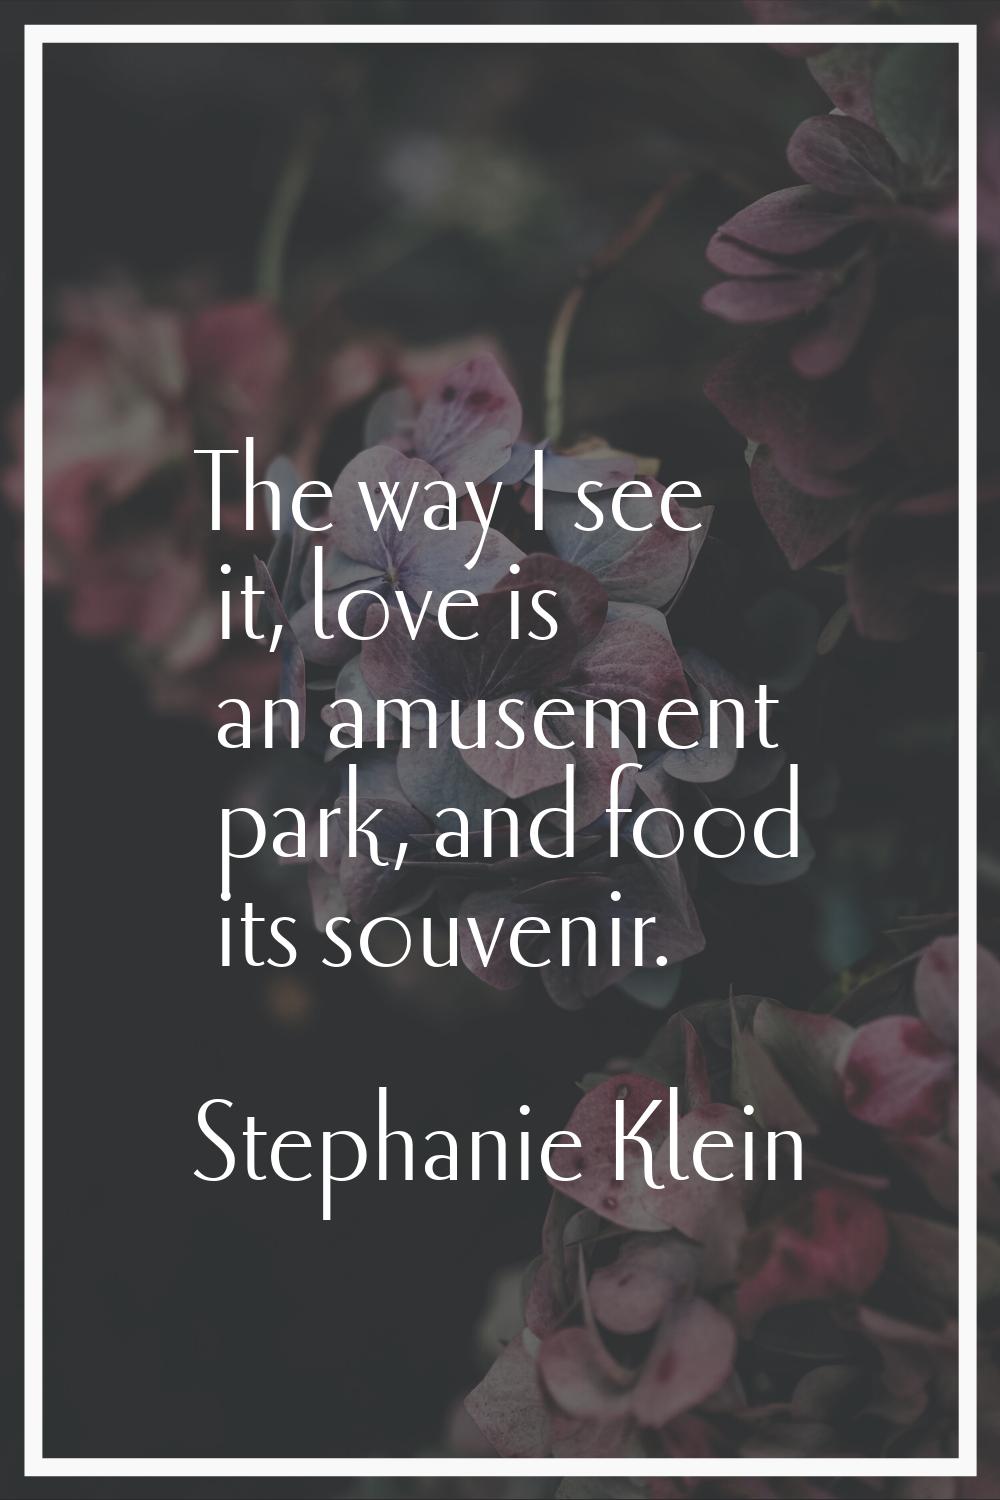 The way I see it, love is an amusement park, and food its souvenir.